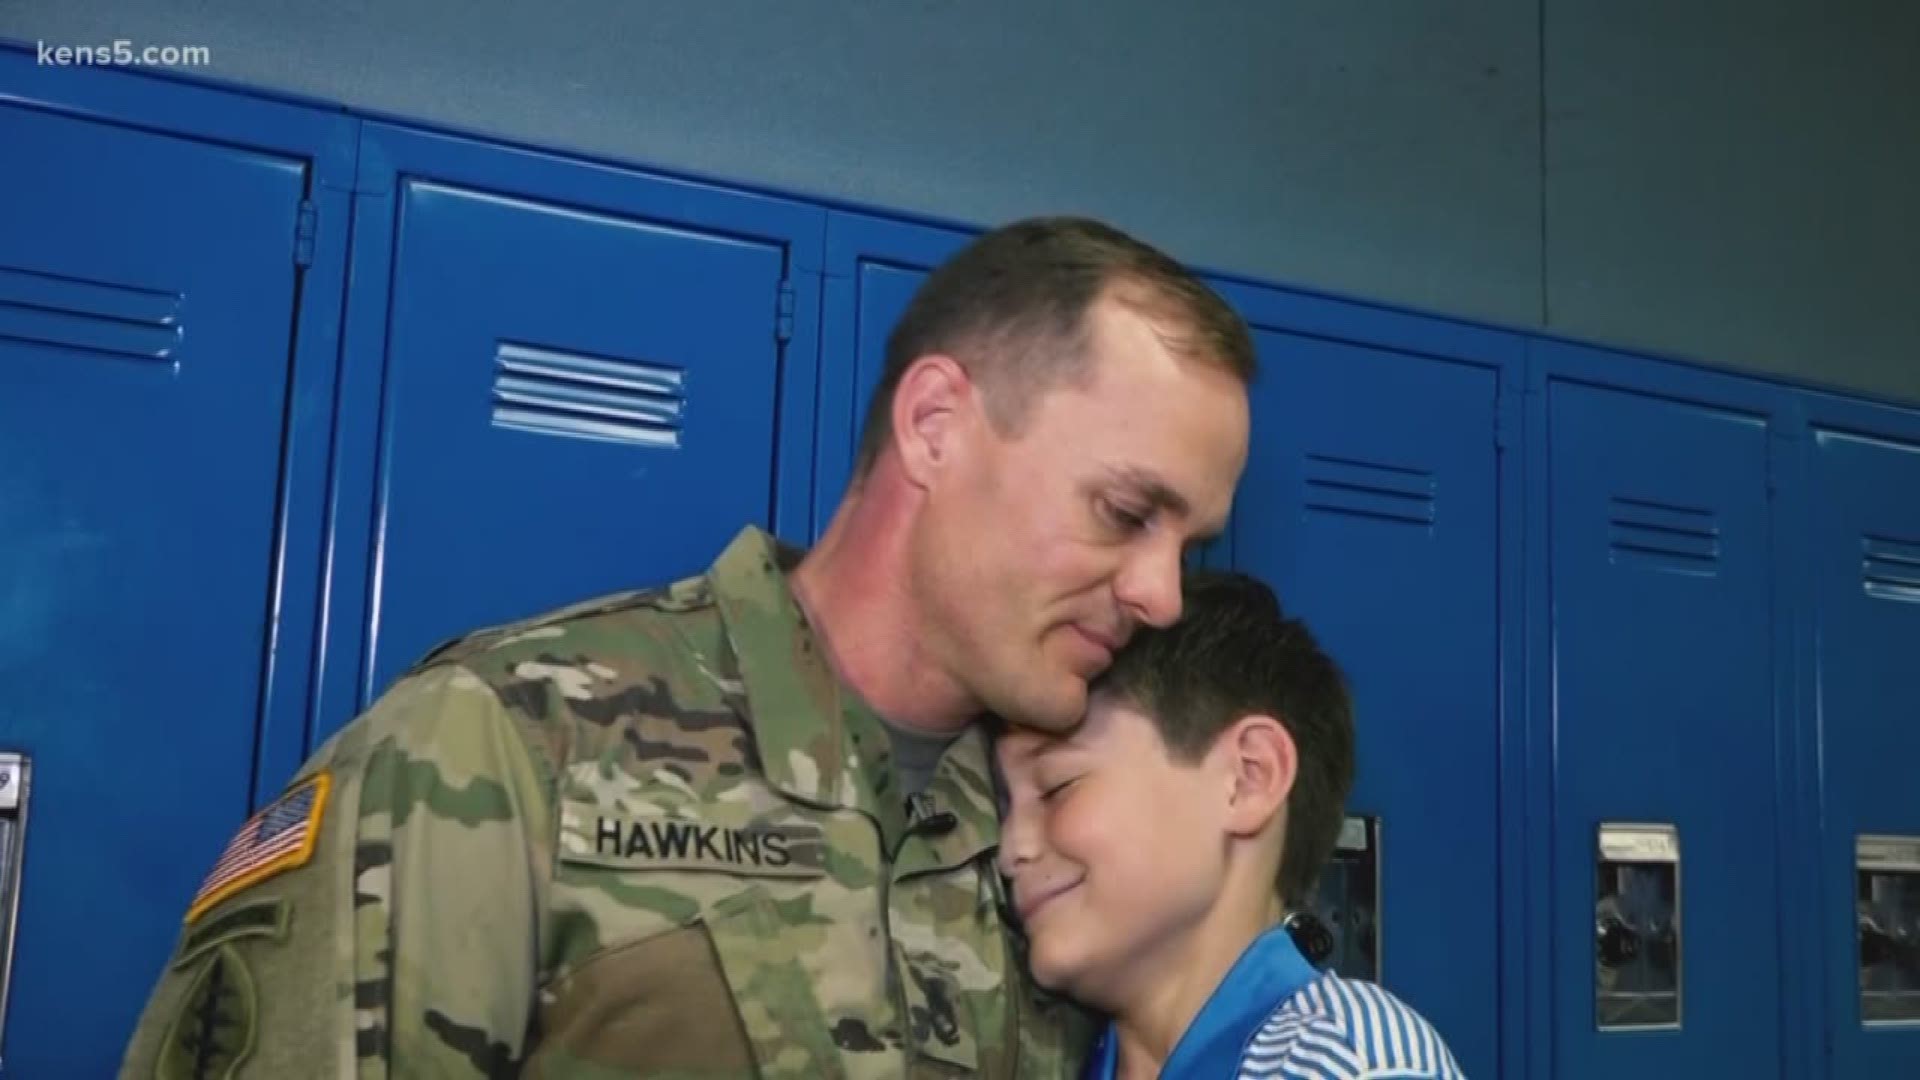 It was an emotional day for Sgt. Shan Hawkins, as the Army medic surprised his son at a San Antonio school after a six-month deployment in Iraq.